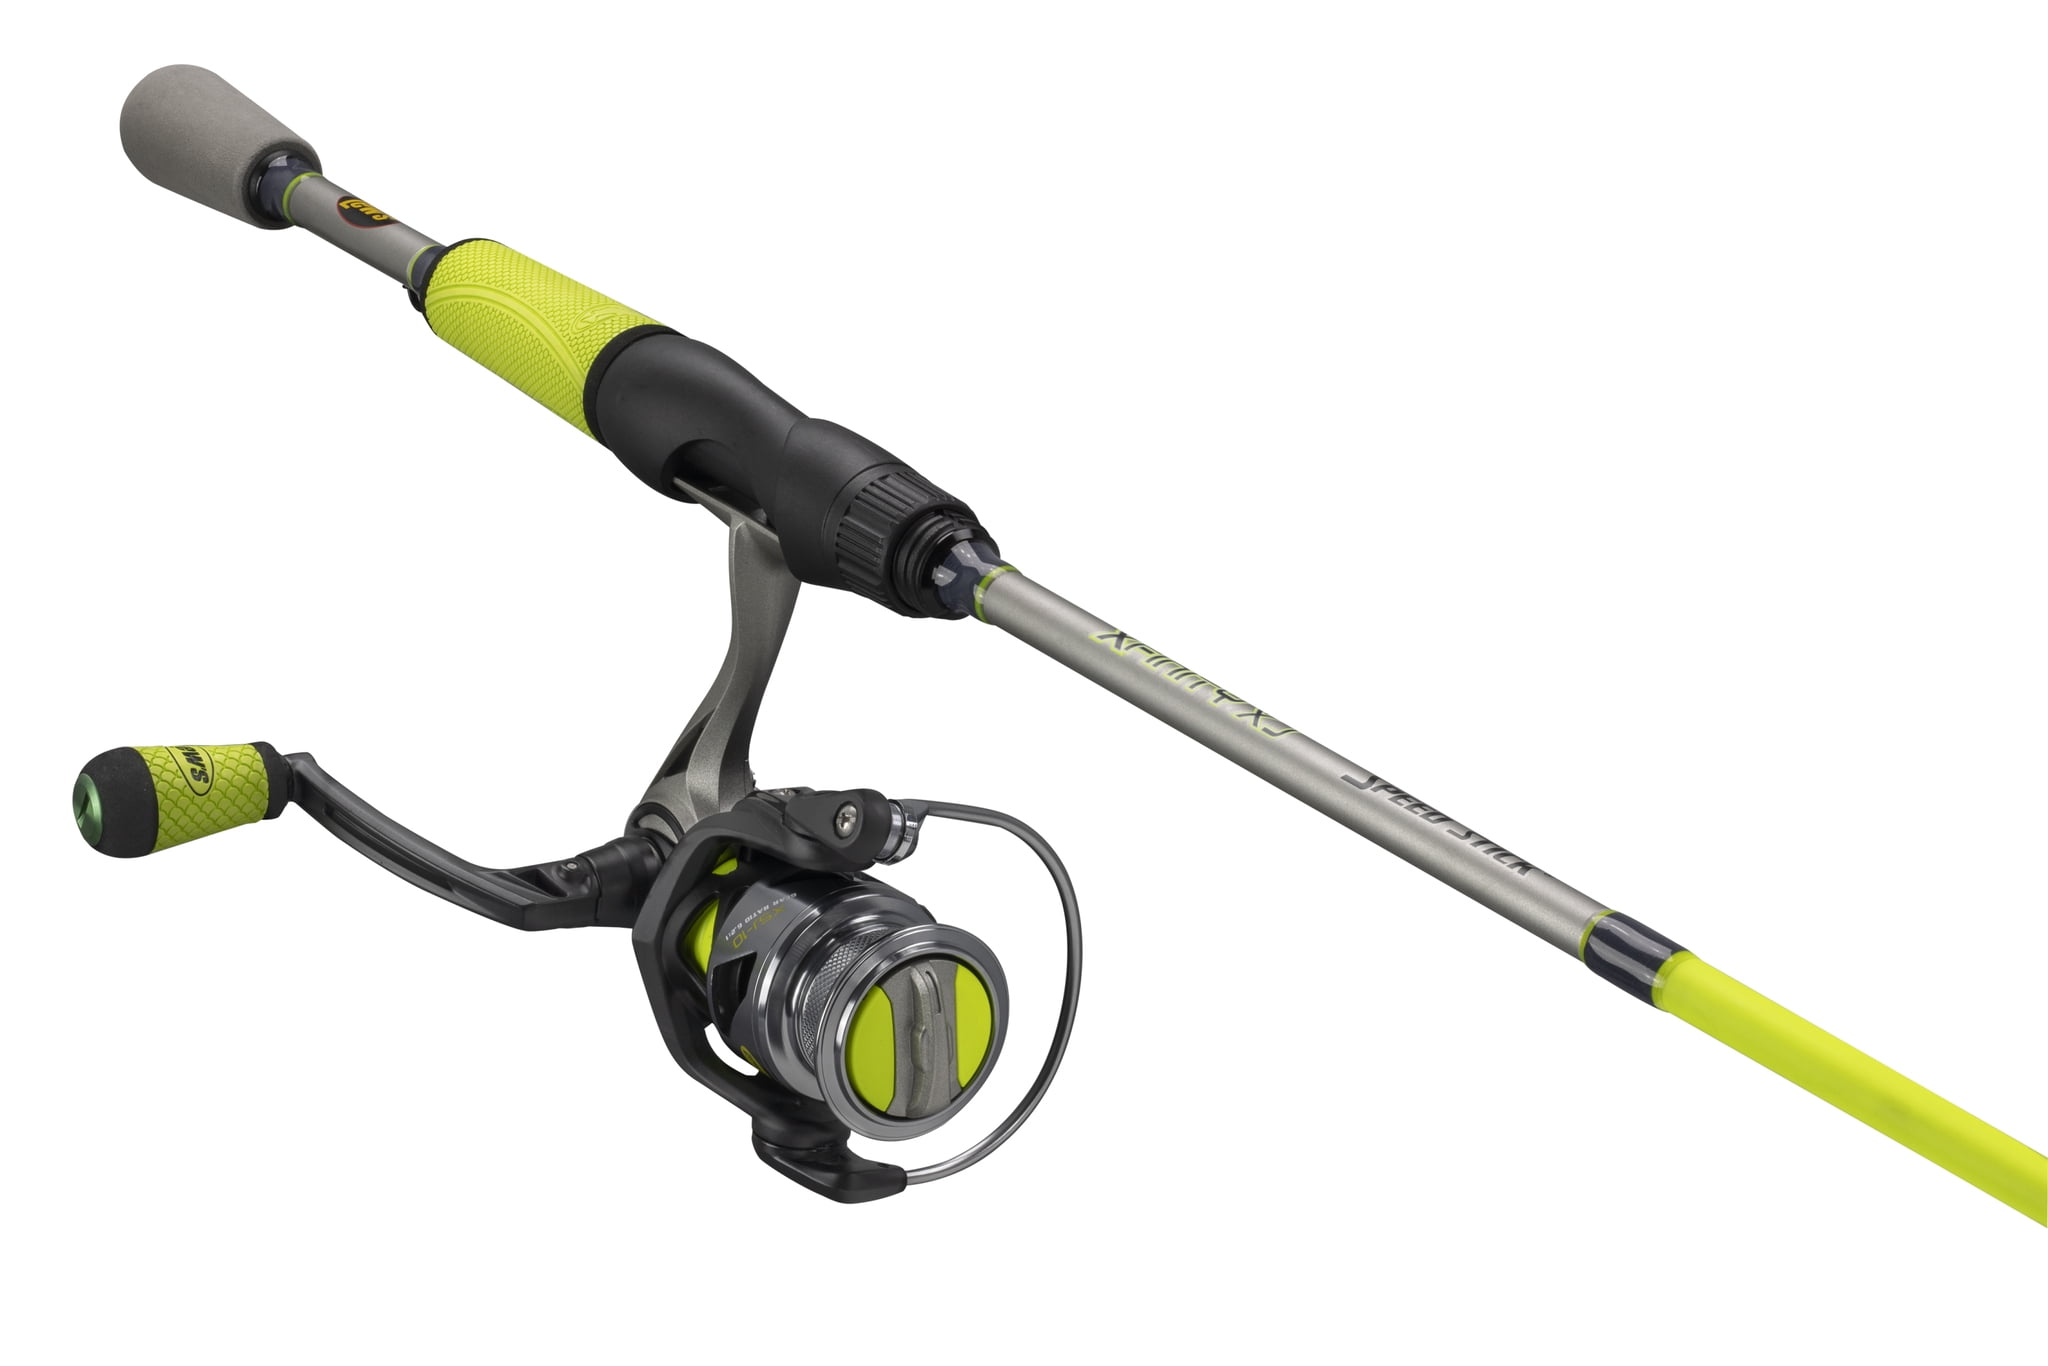 Lew's Xfinity Speed Spin Spinning Fishing Reel